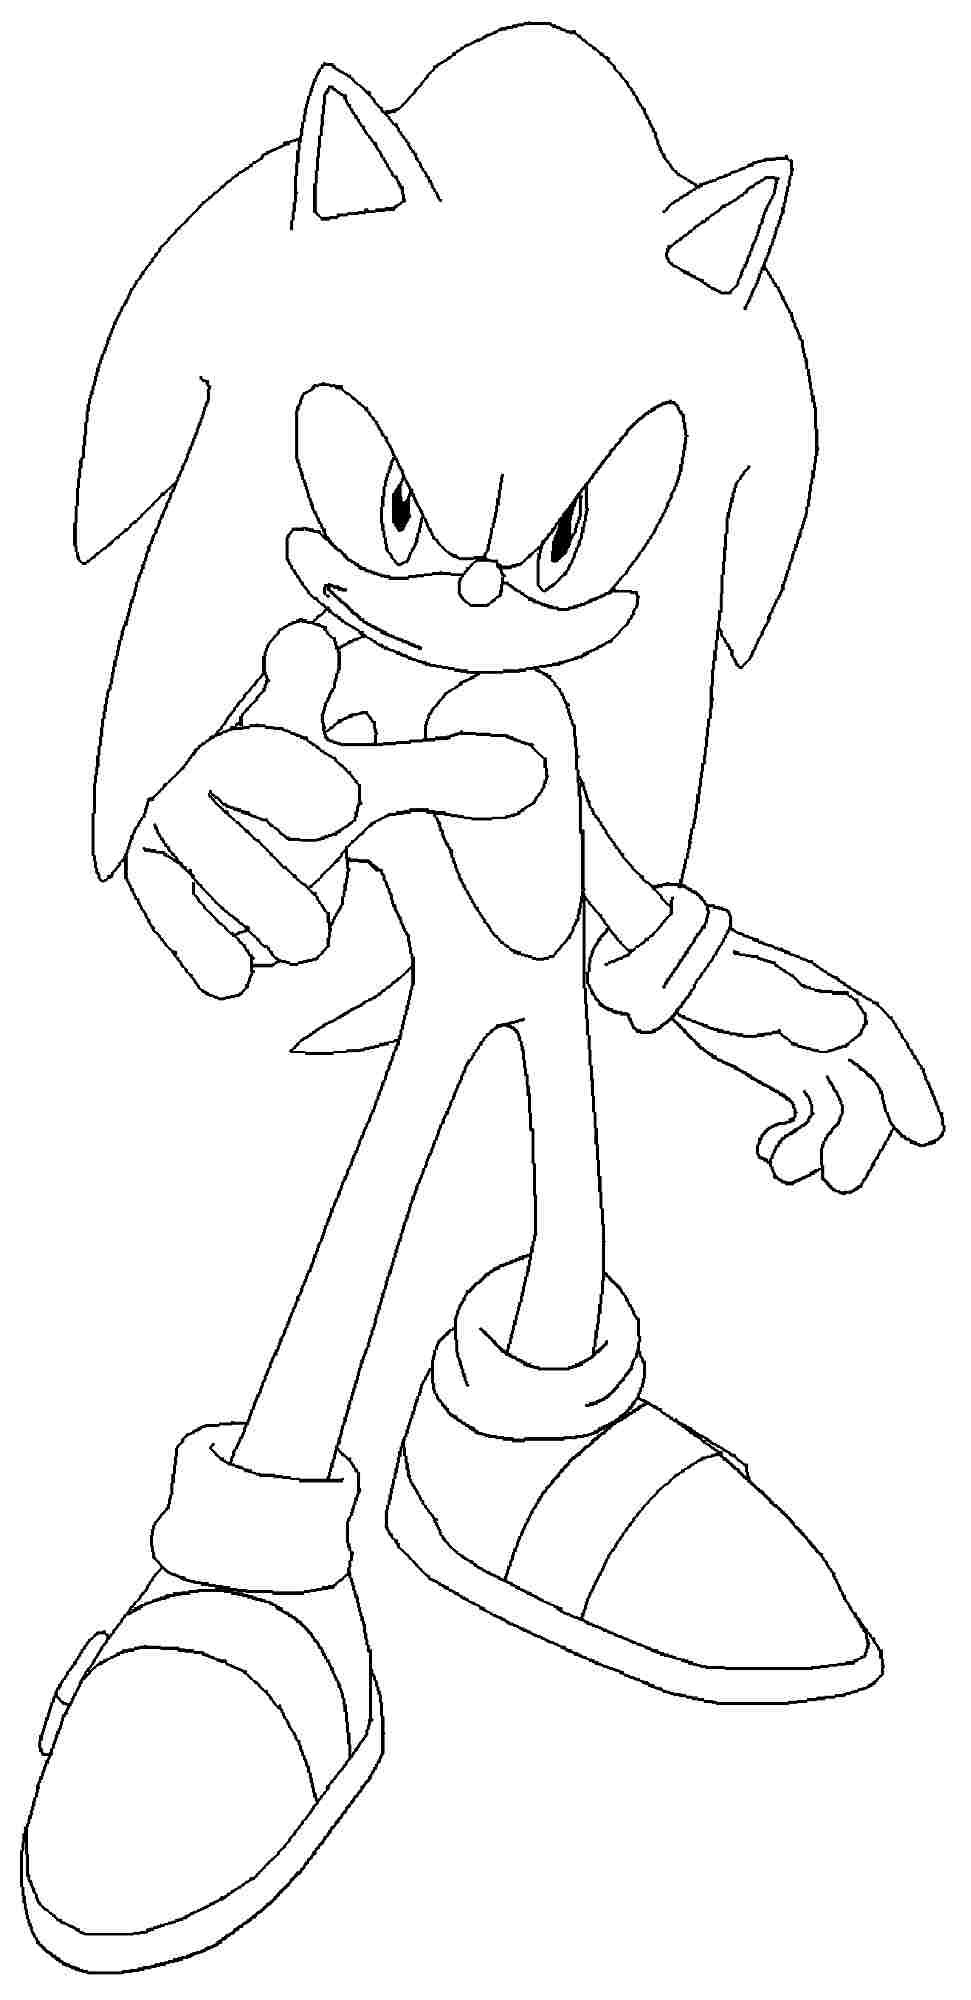 Sonic 2 Printable Coloring Pages - Customize and Print